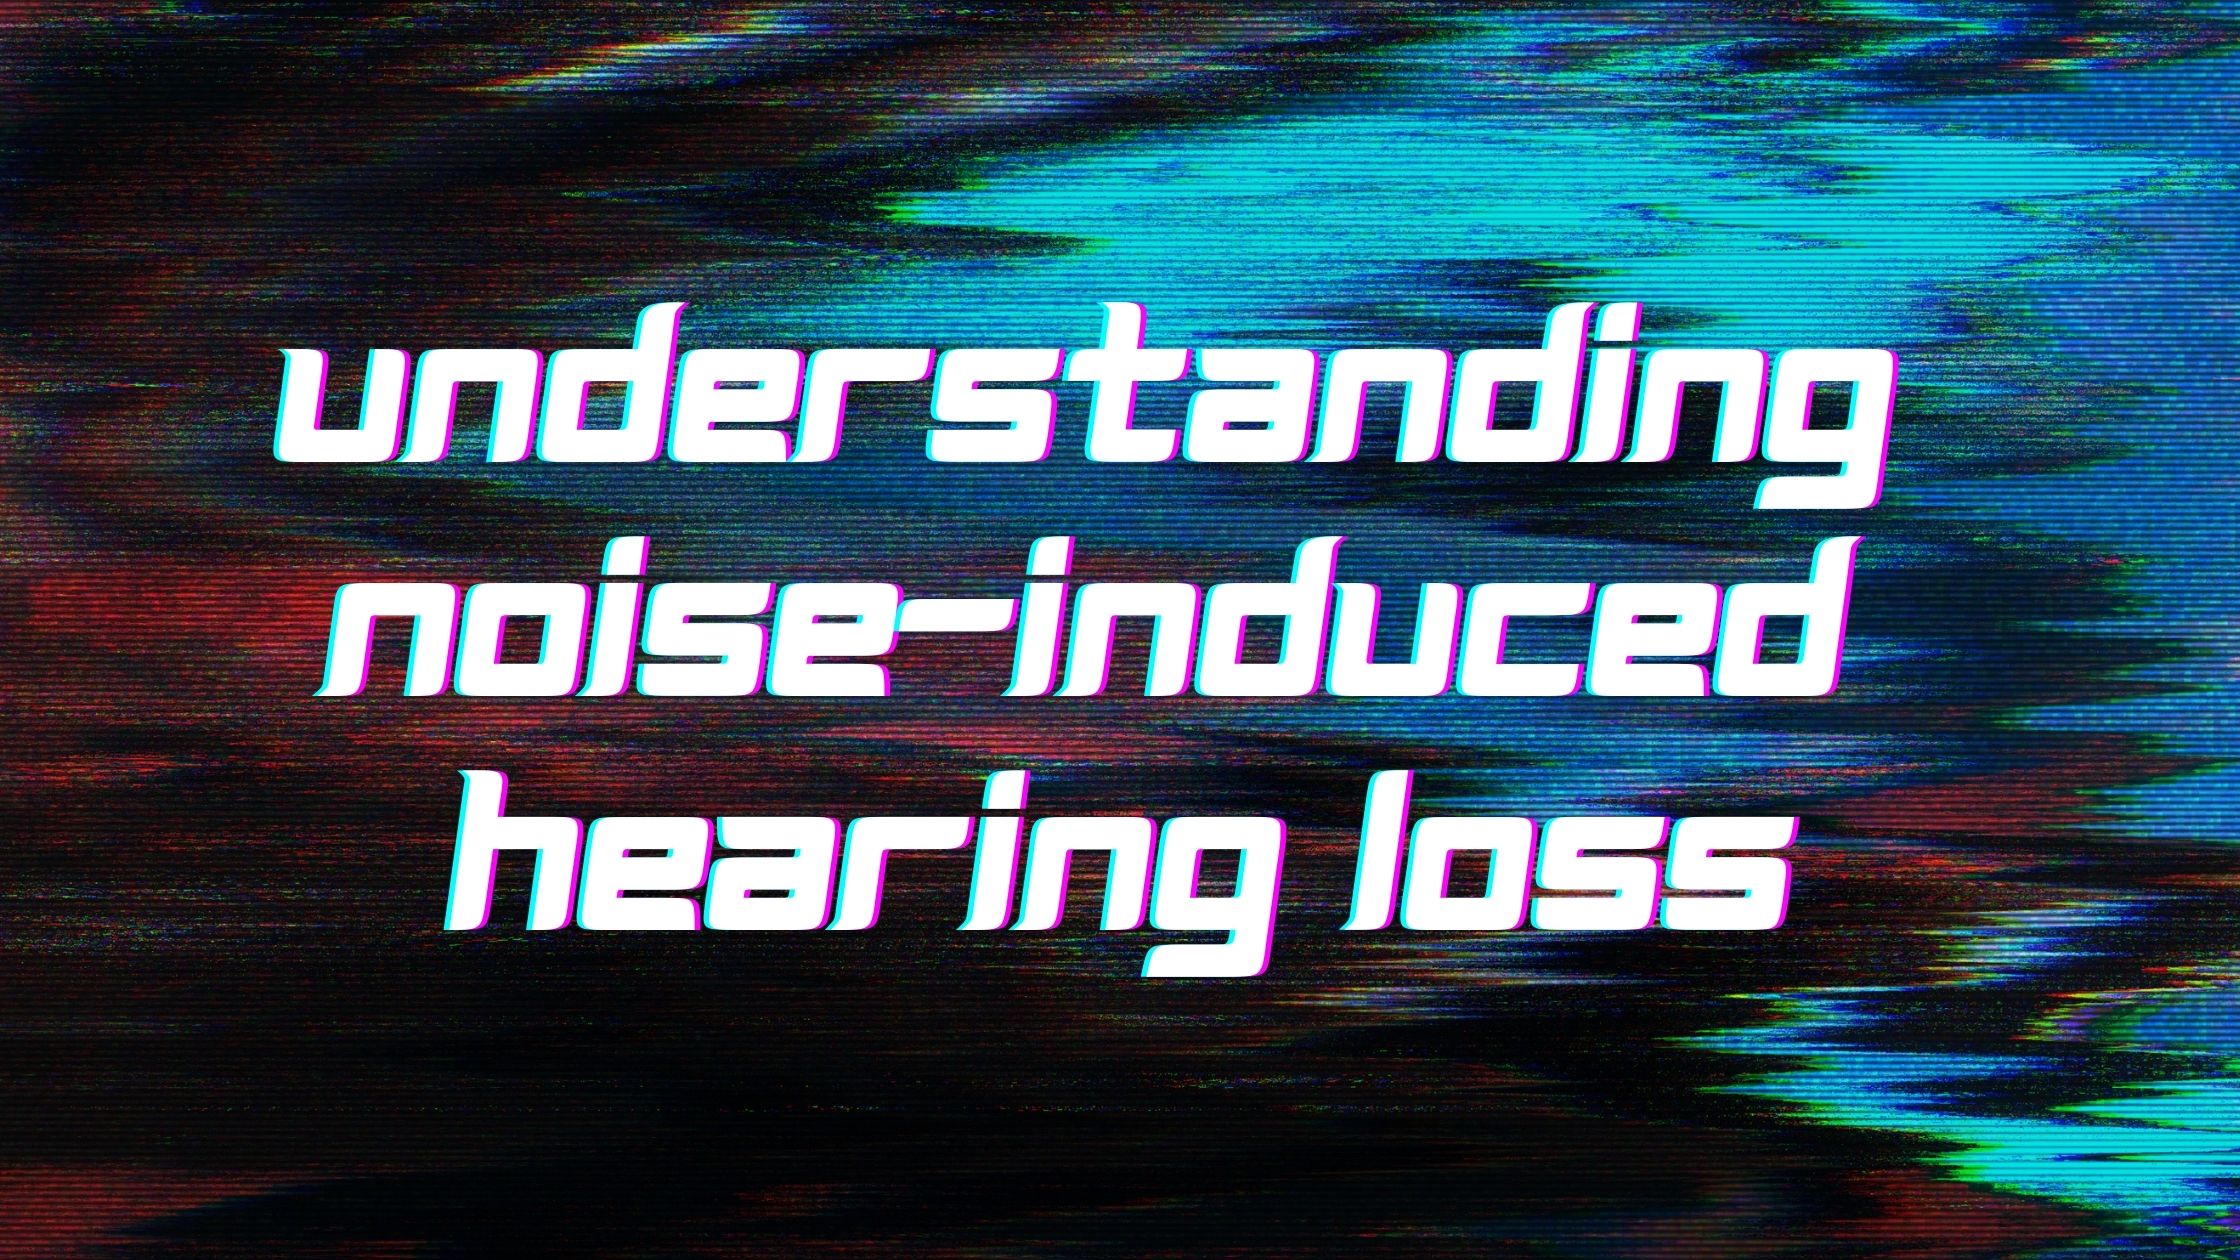 Understanding Noise-Induced Hearing Loss